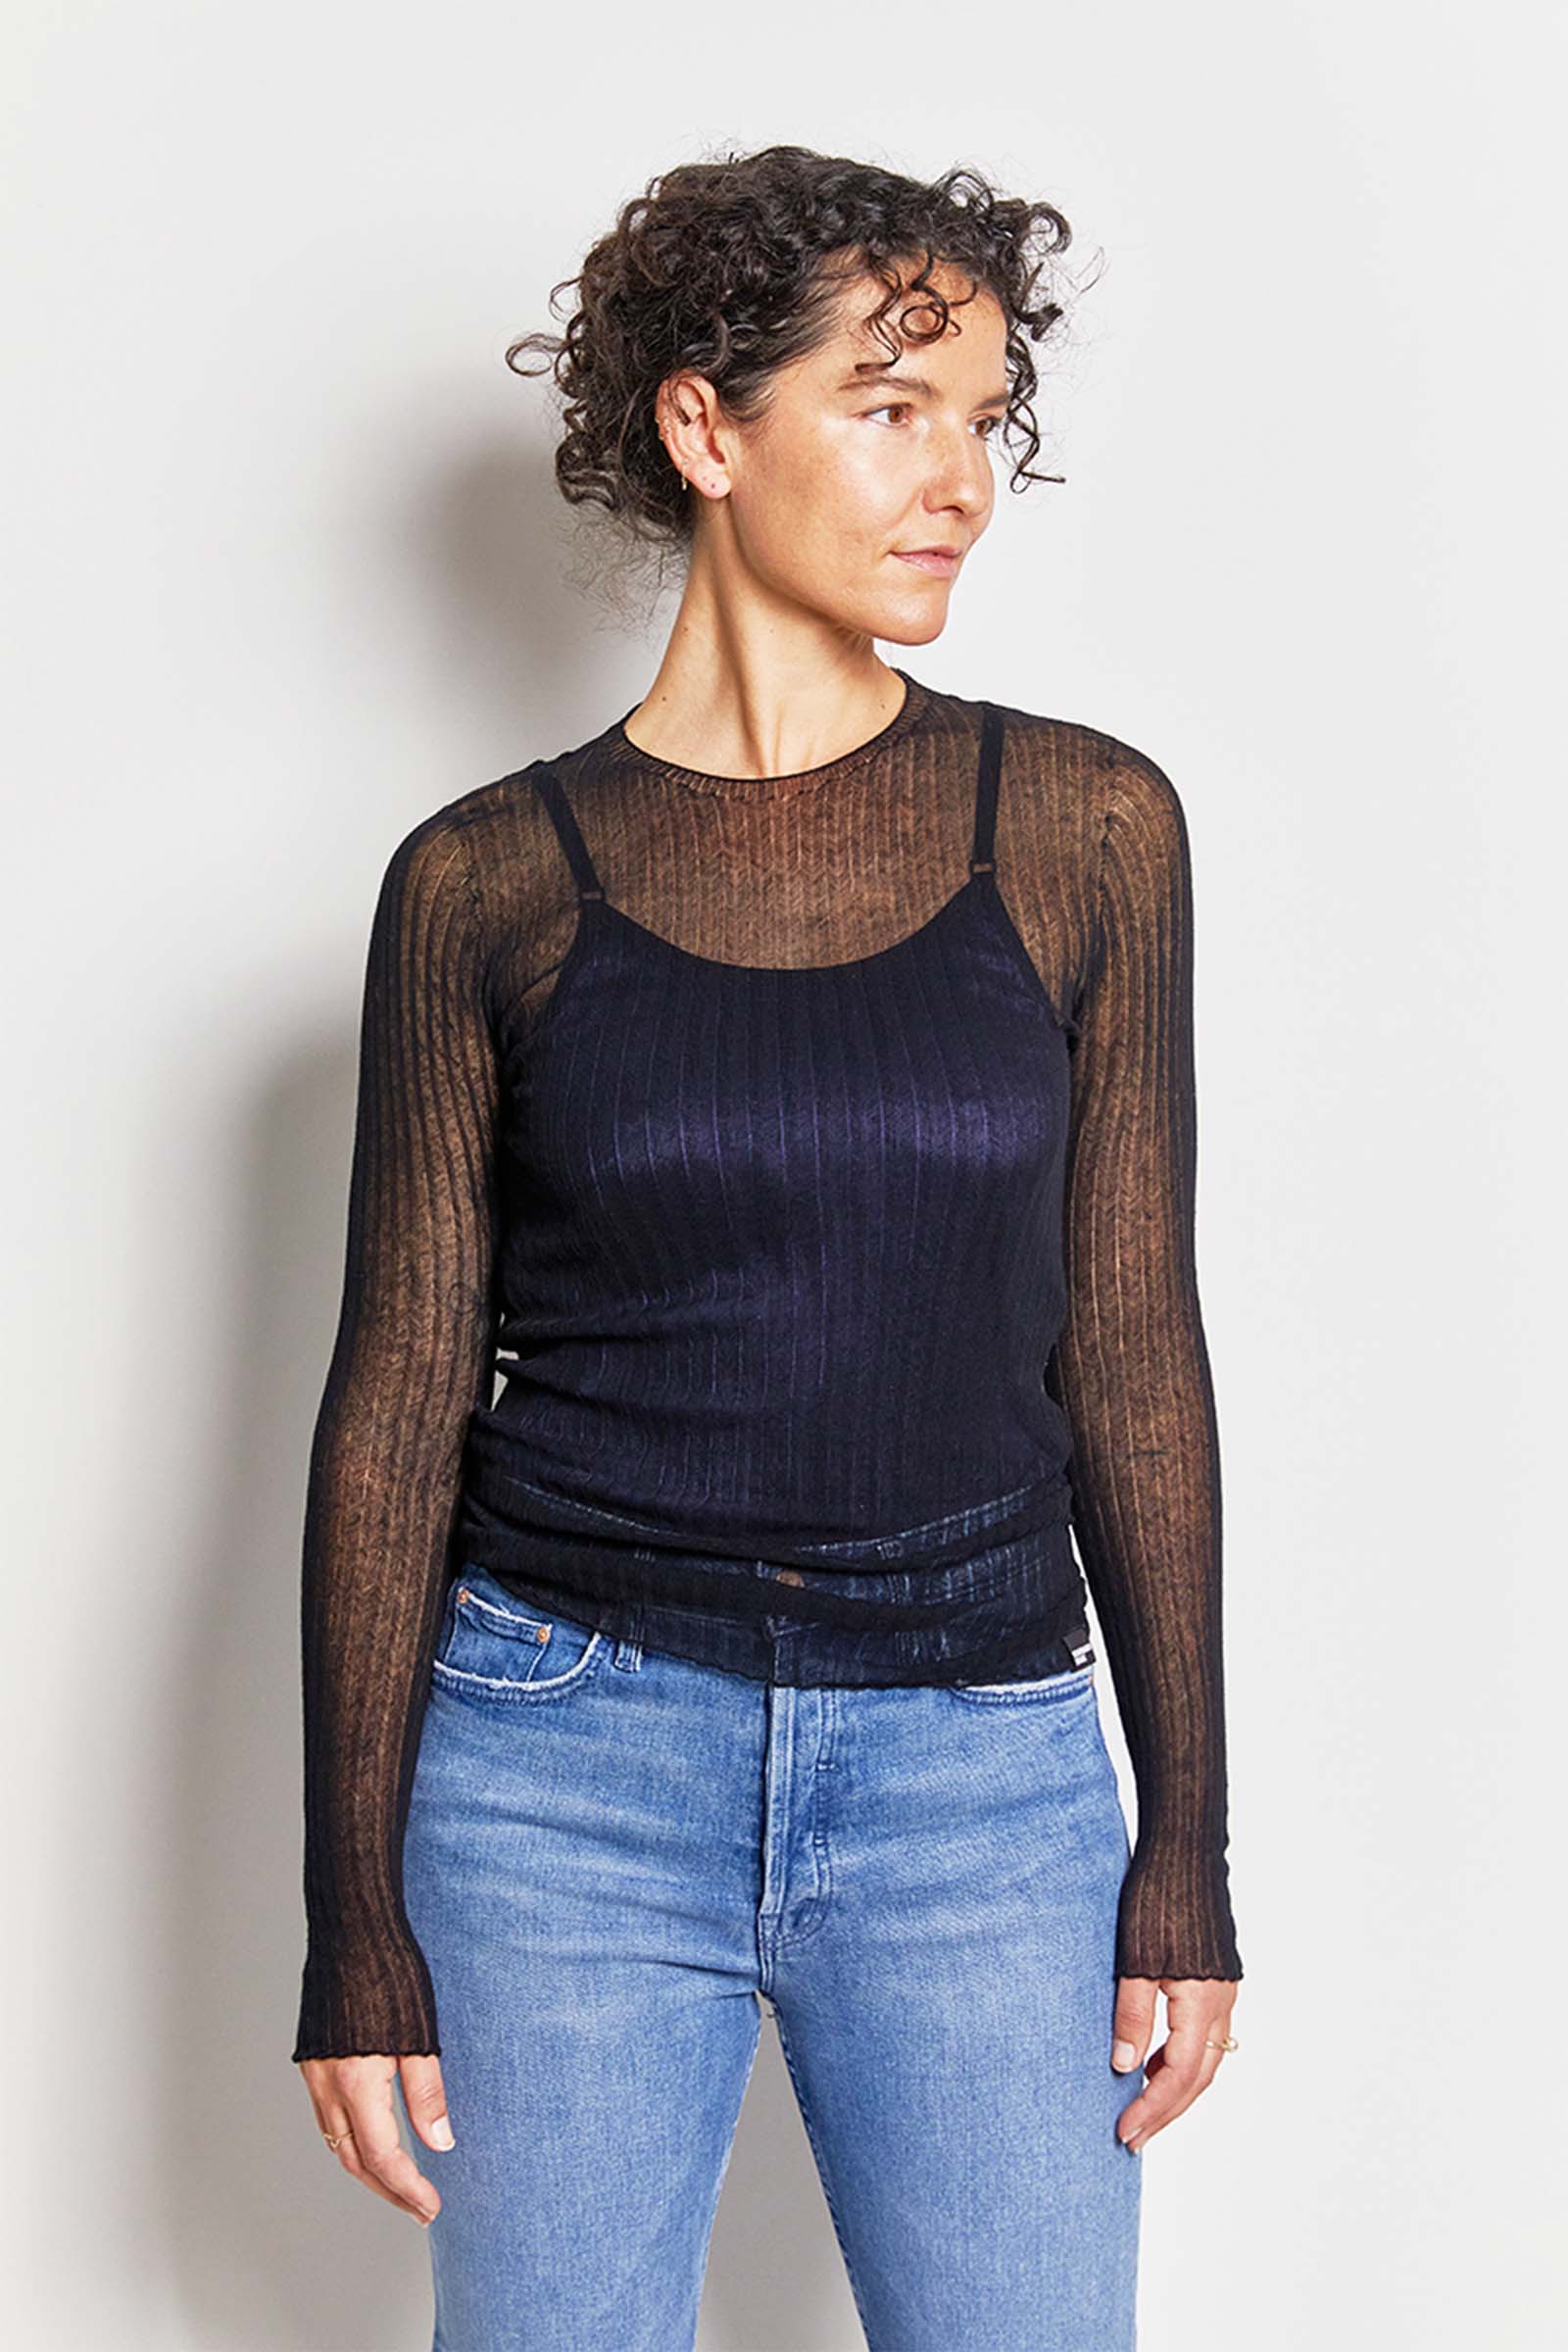 byfreer standard issue cotton tulle crew.